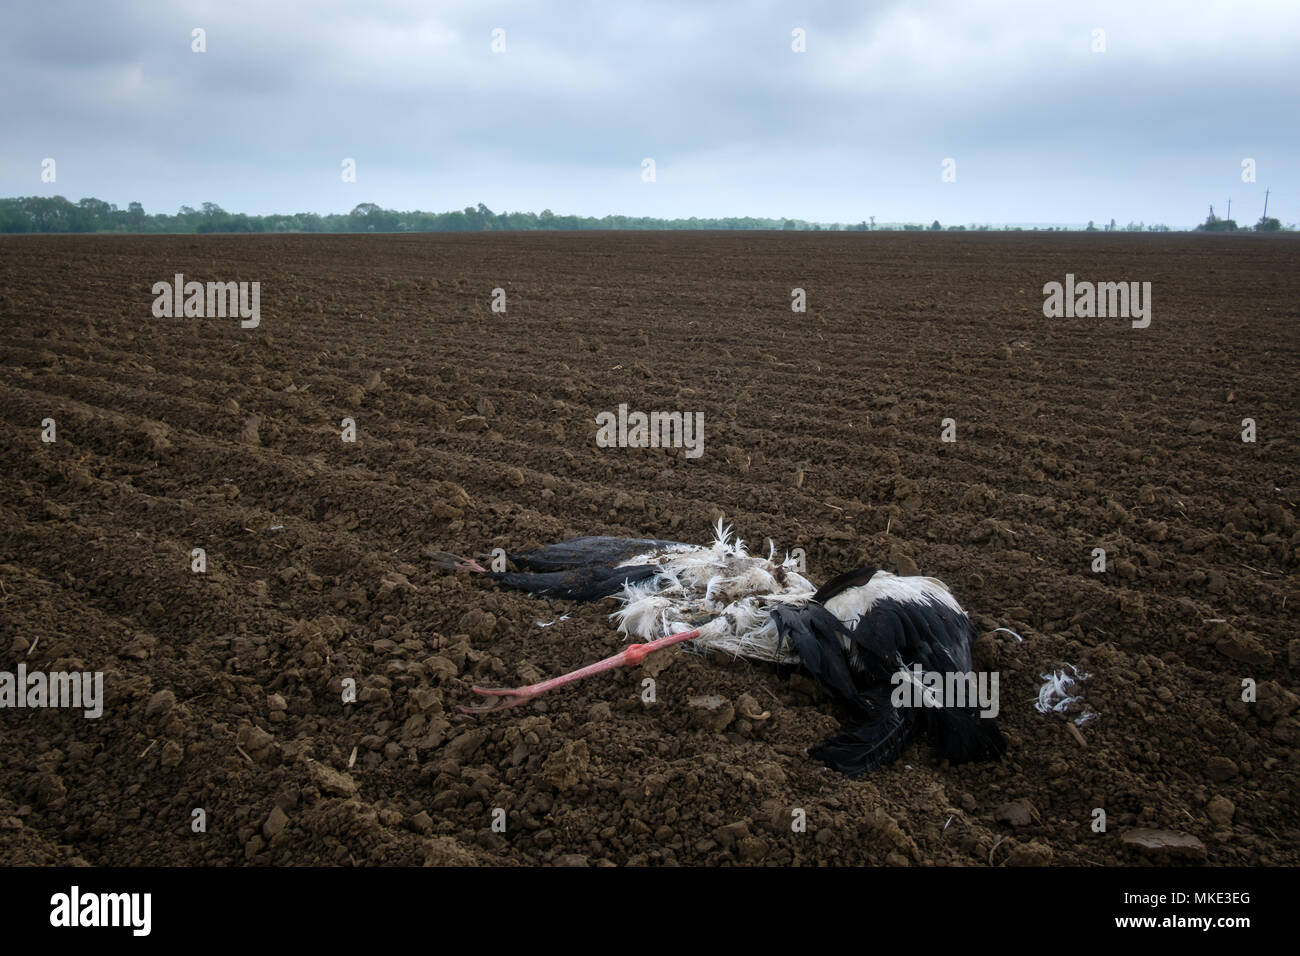 Dead stork on agriculture field Stock Photo